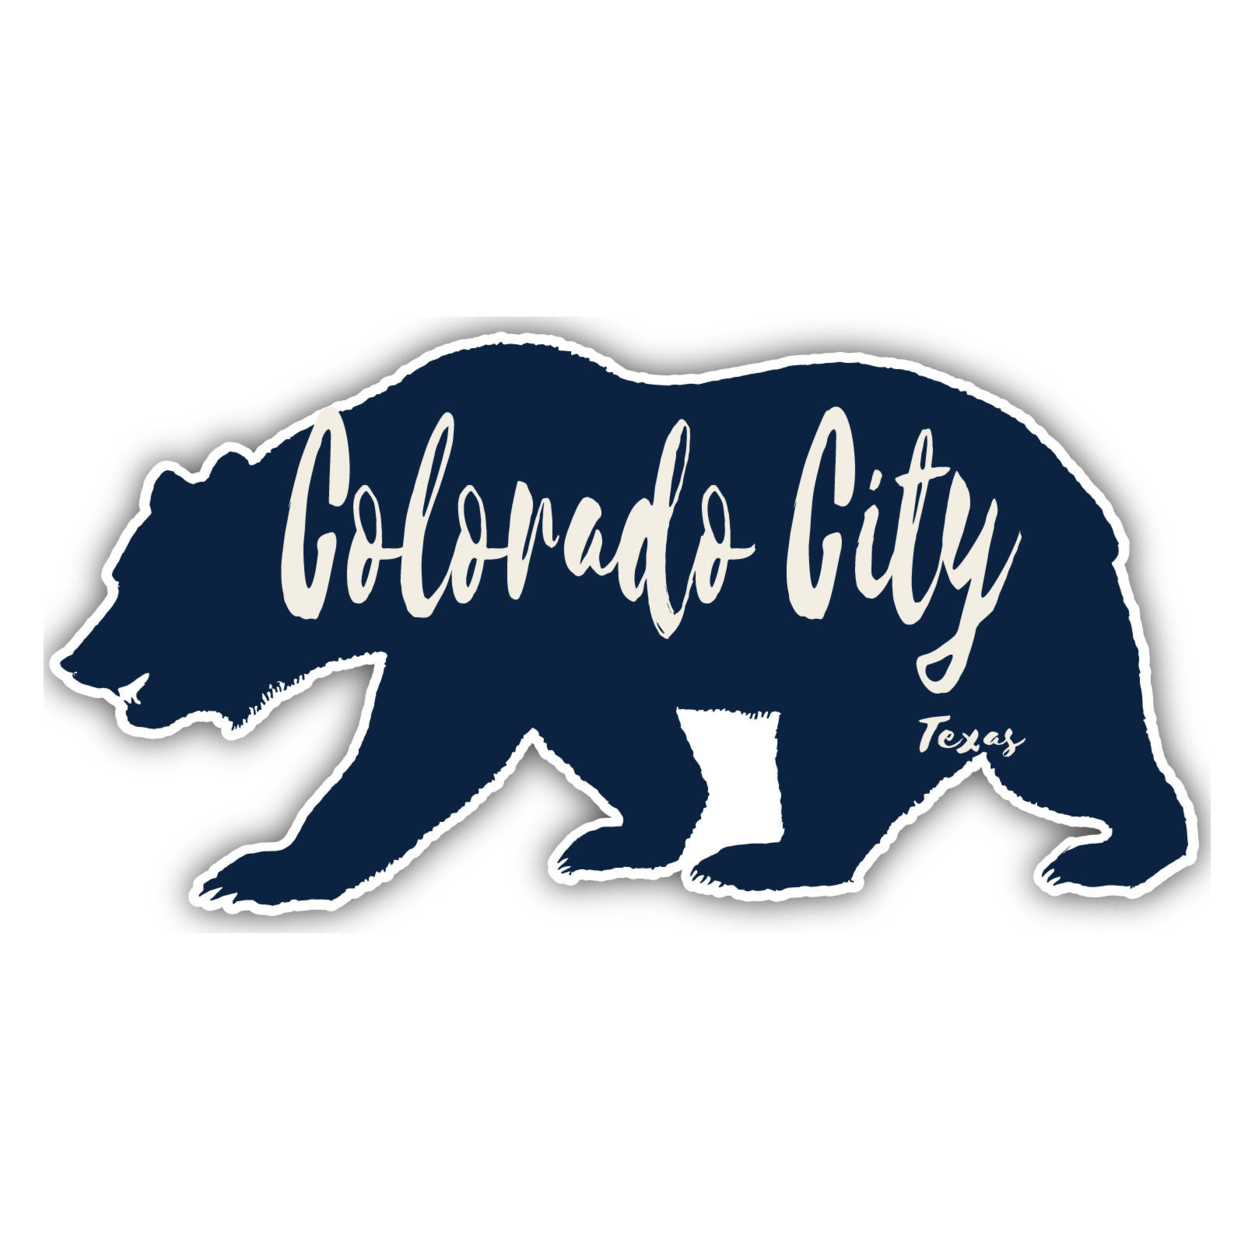 Colorado City Texas Souvenir Decorative Stickers (Choose Theme And Size) - Single Unit, 8-Inch, Great Outdoors